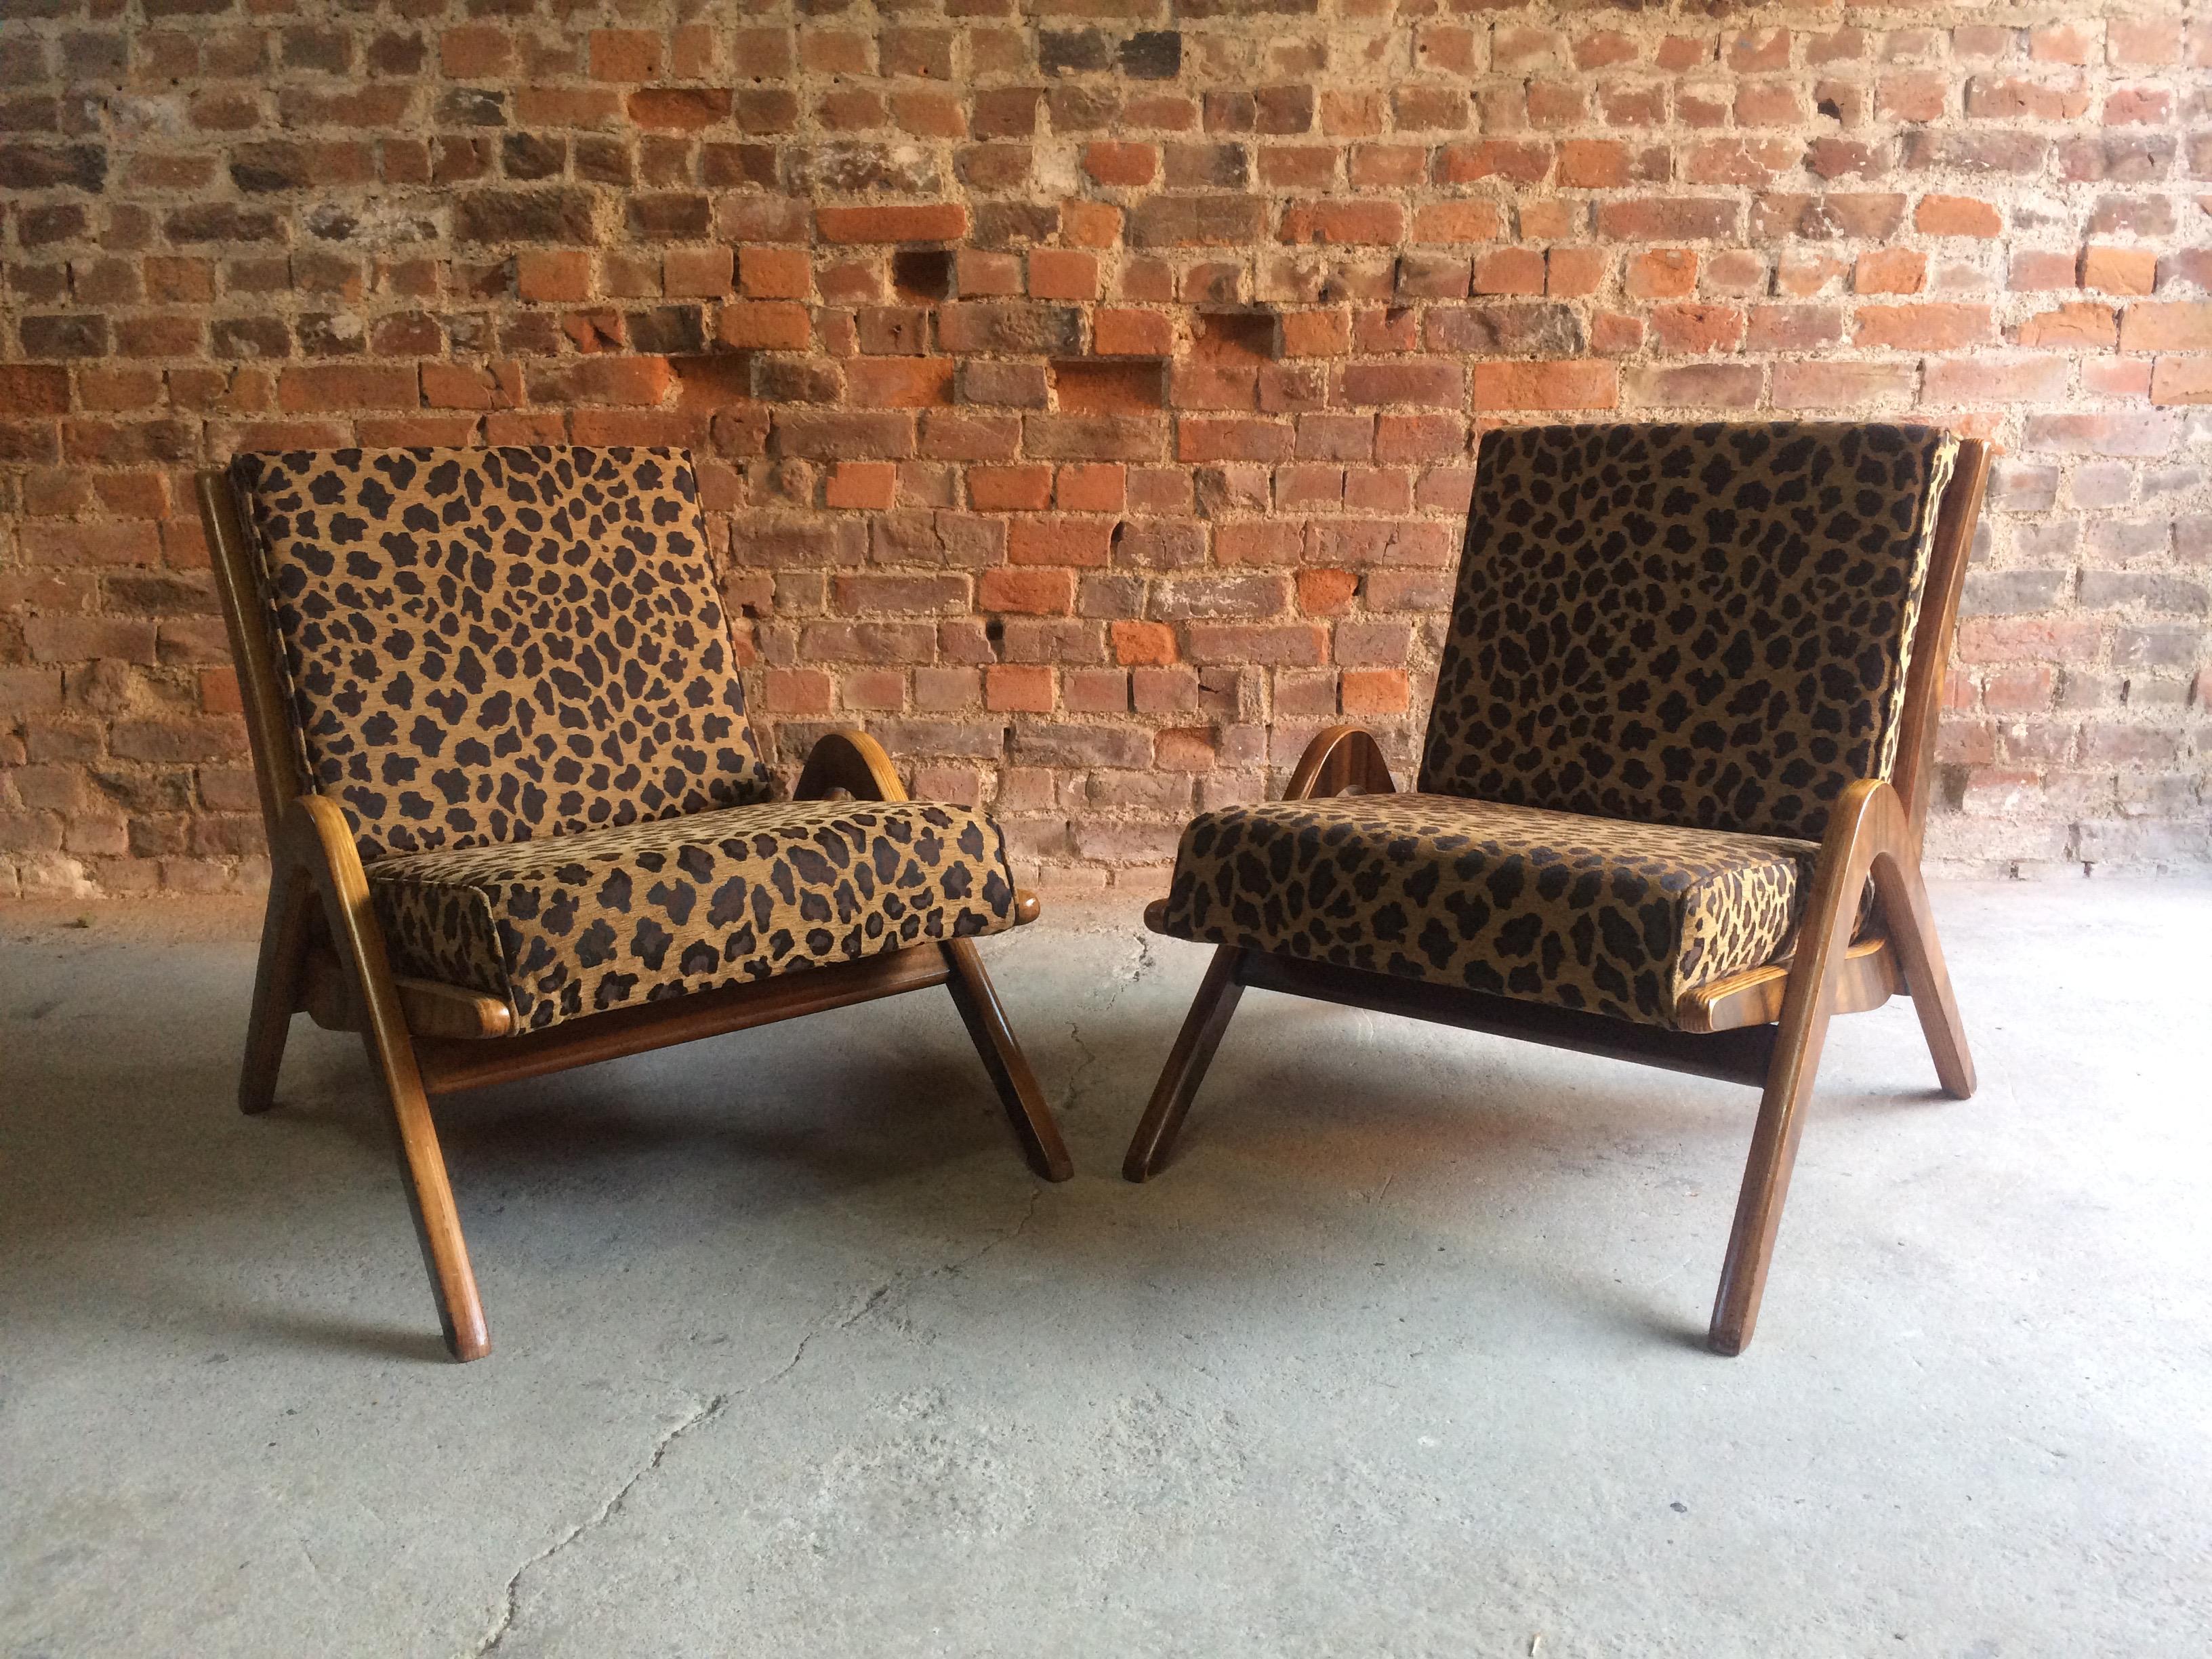 Midcentury Boomerang Chairs Pair by Neil Morris for Morris of Glasgow Walnut 1